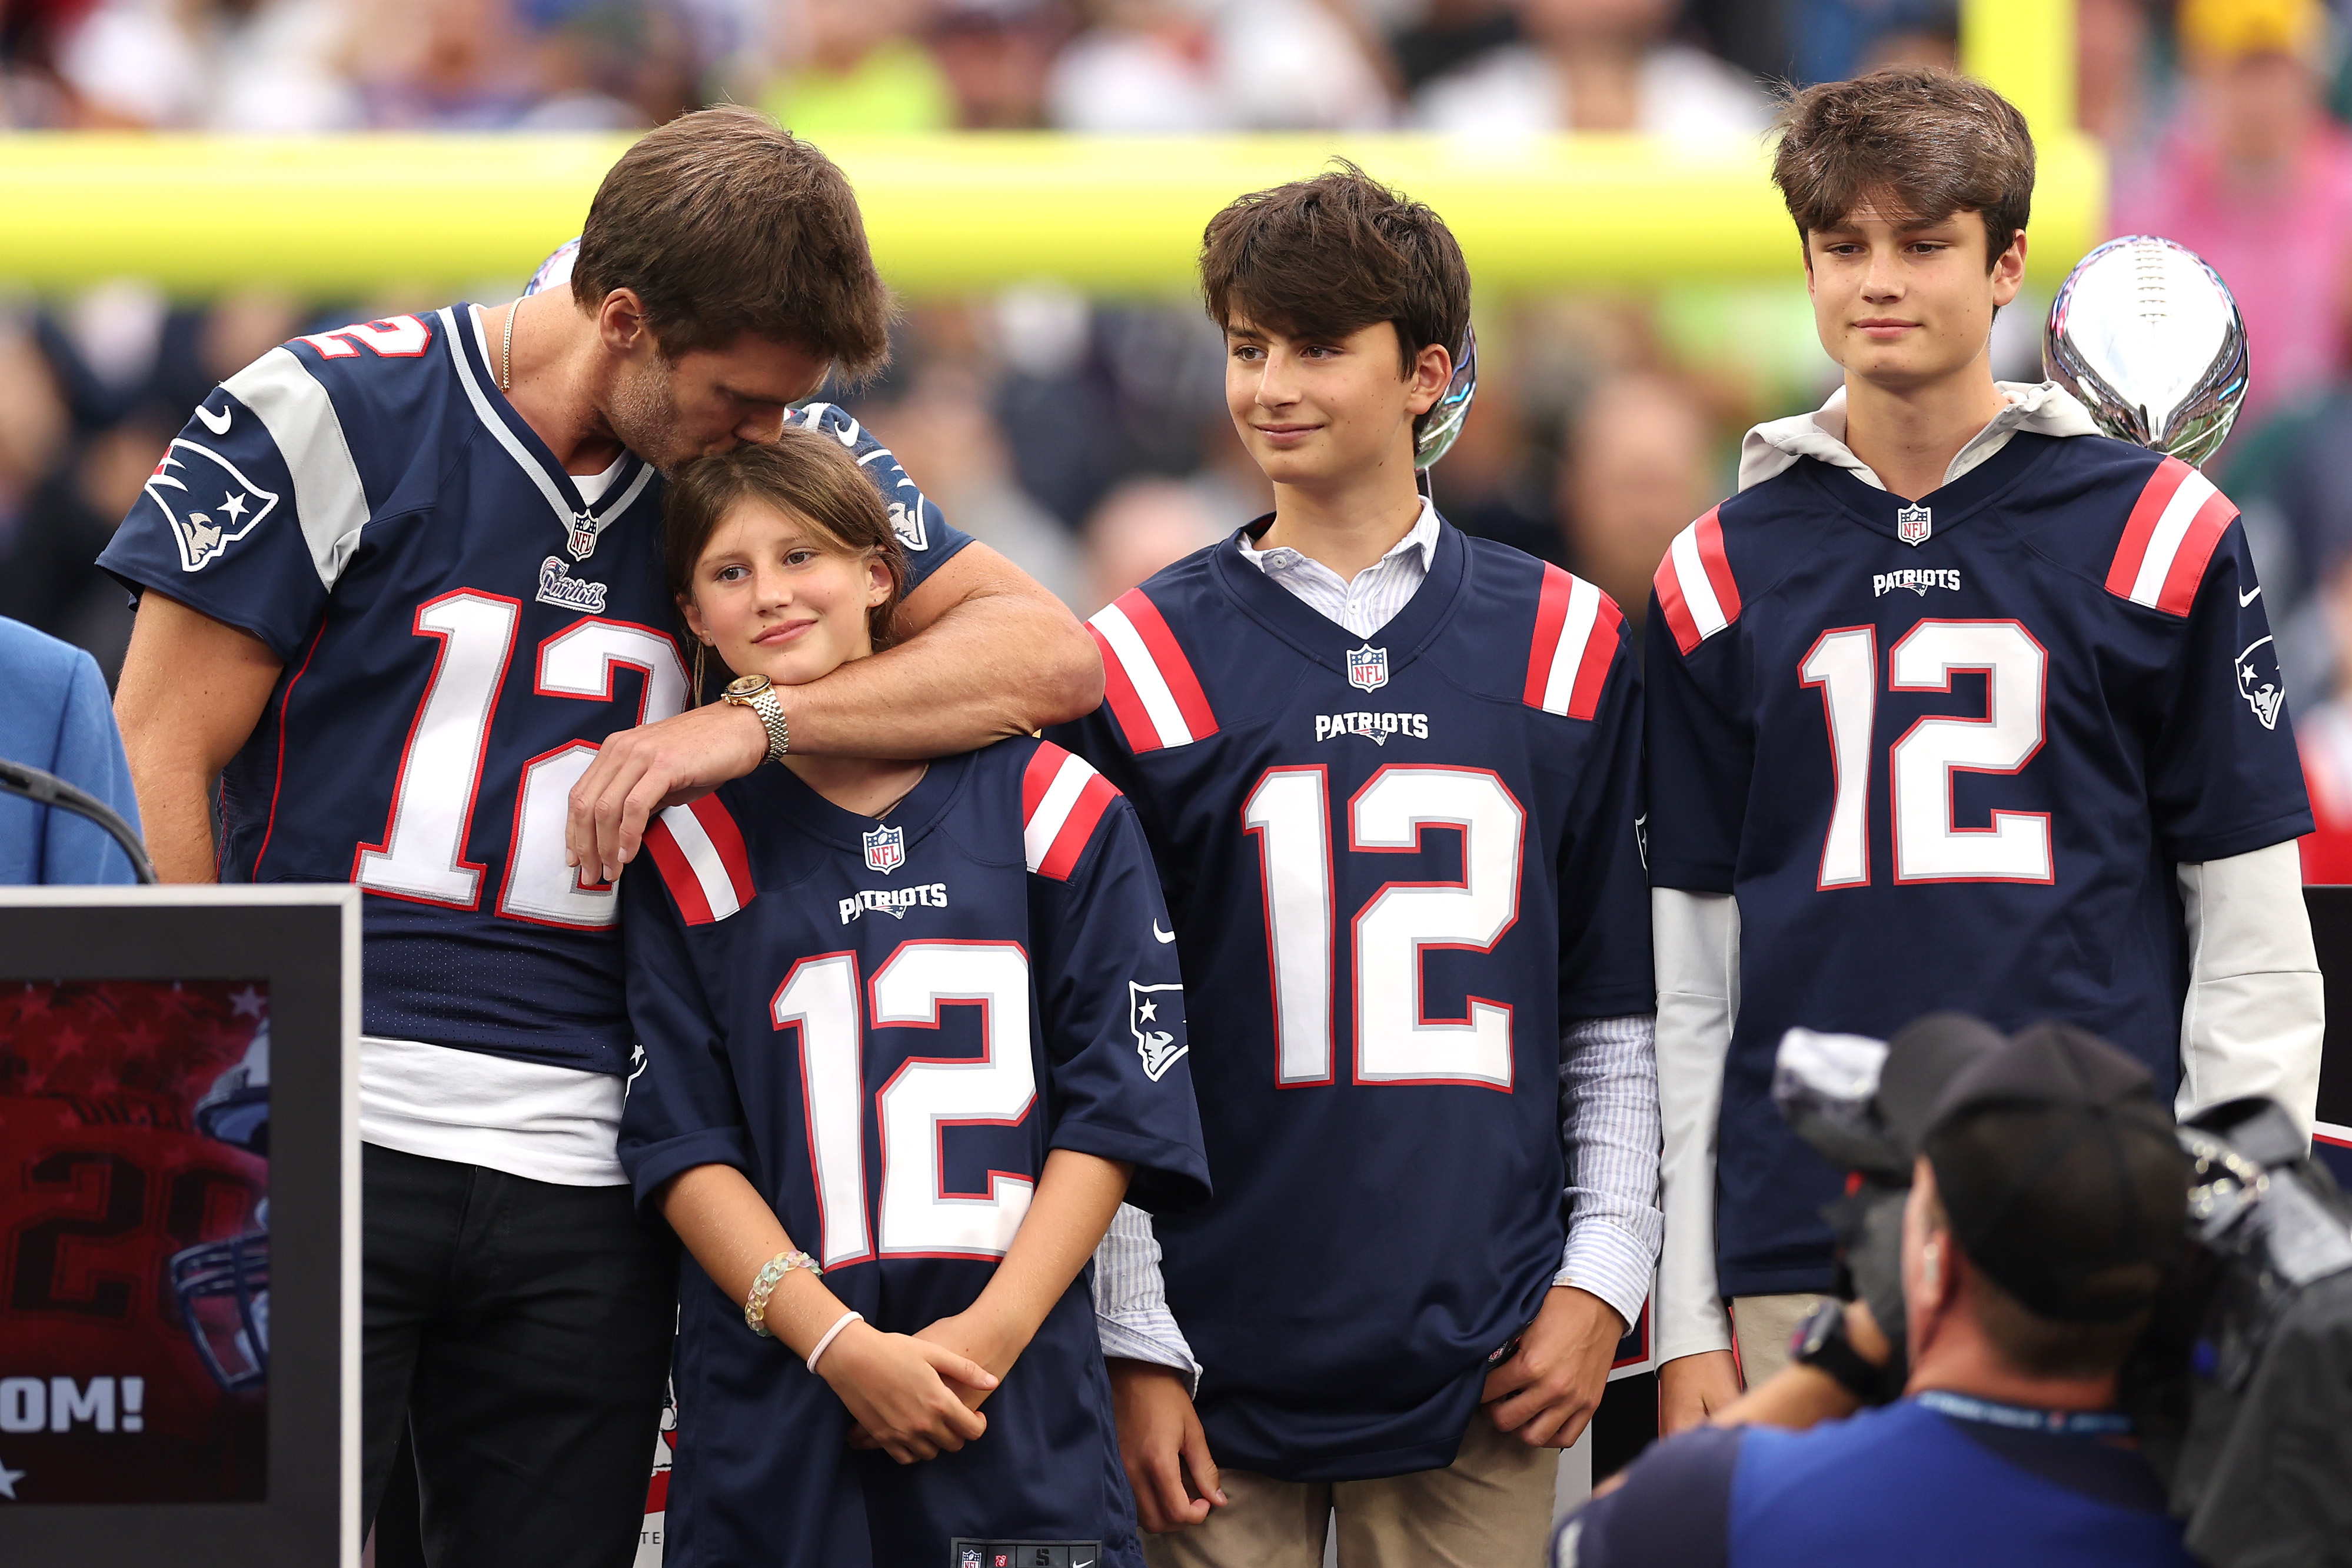 Tom with his three children (one with Bridget Moynahan), all wearing Patriots #12 uniforms